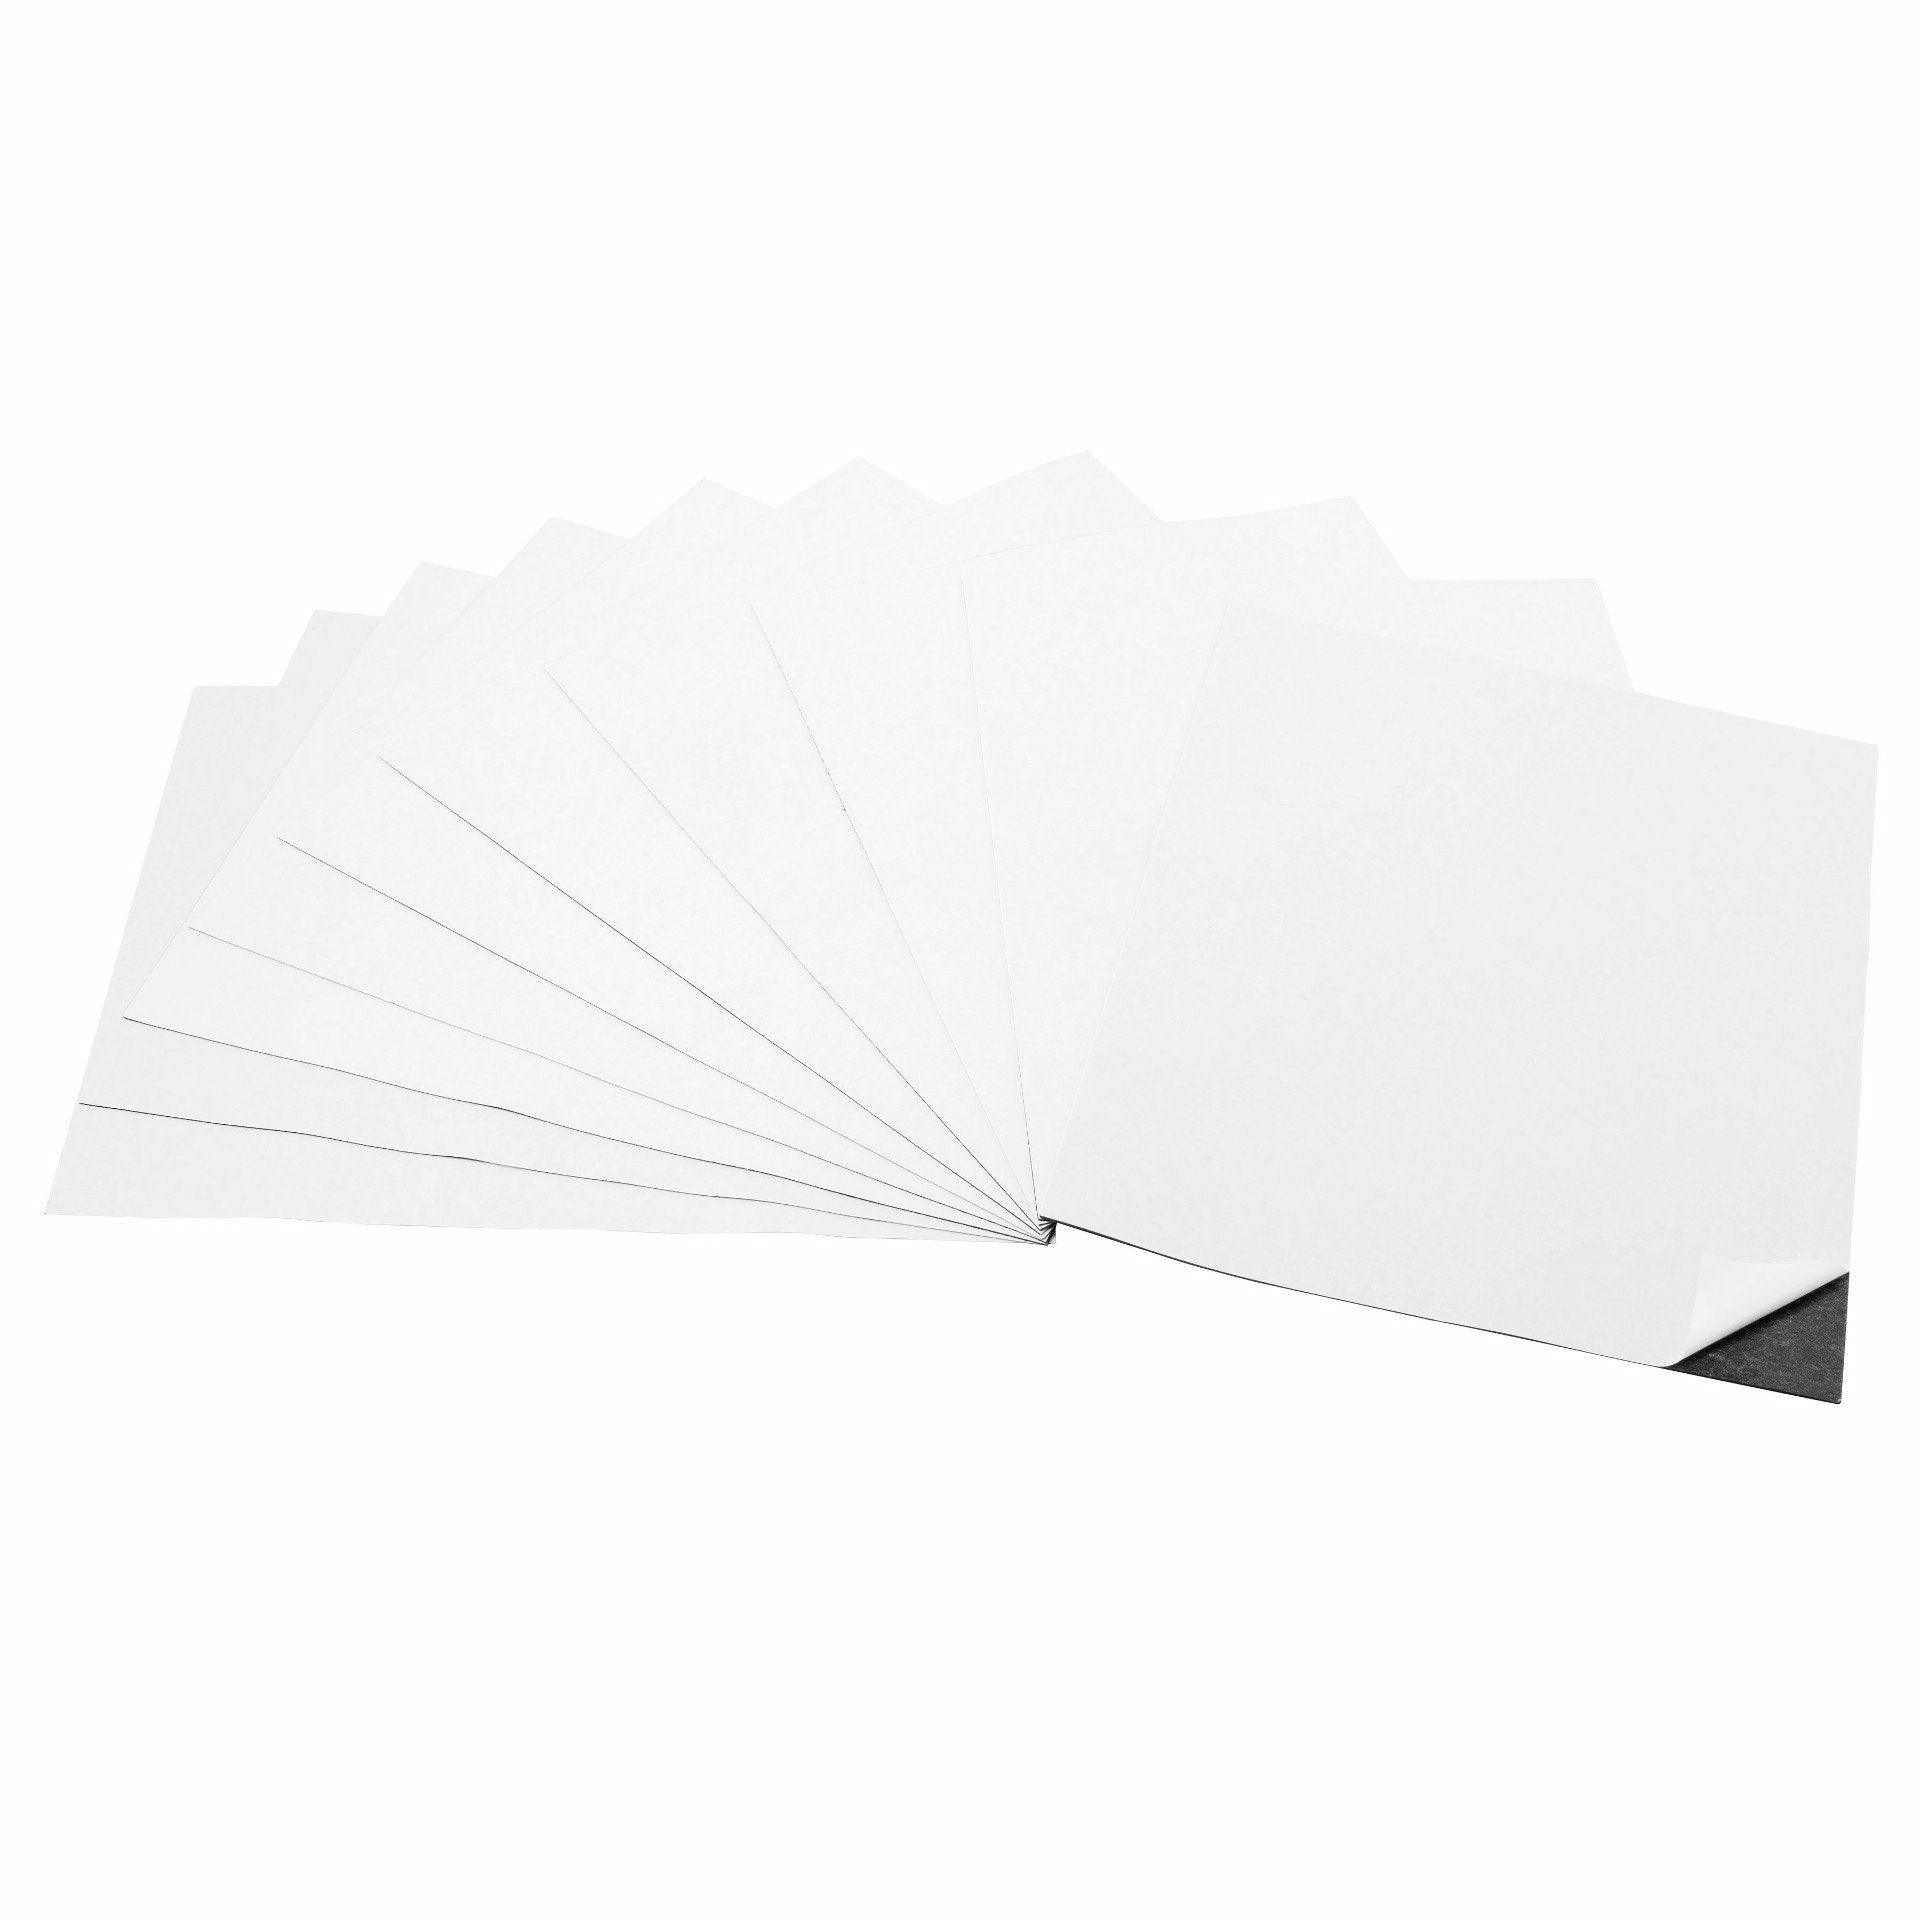 RKZCT 10 Pcs Flexible Magnetic Sheets with India